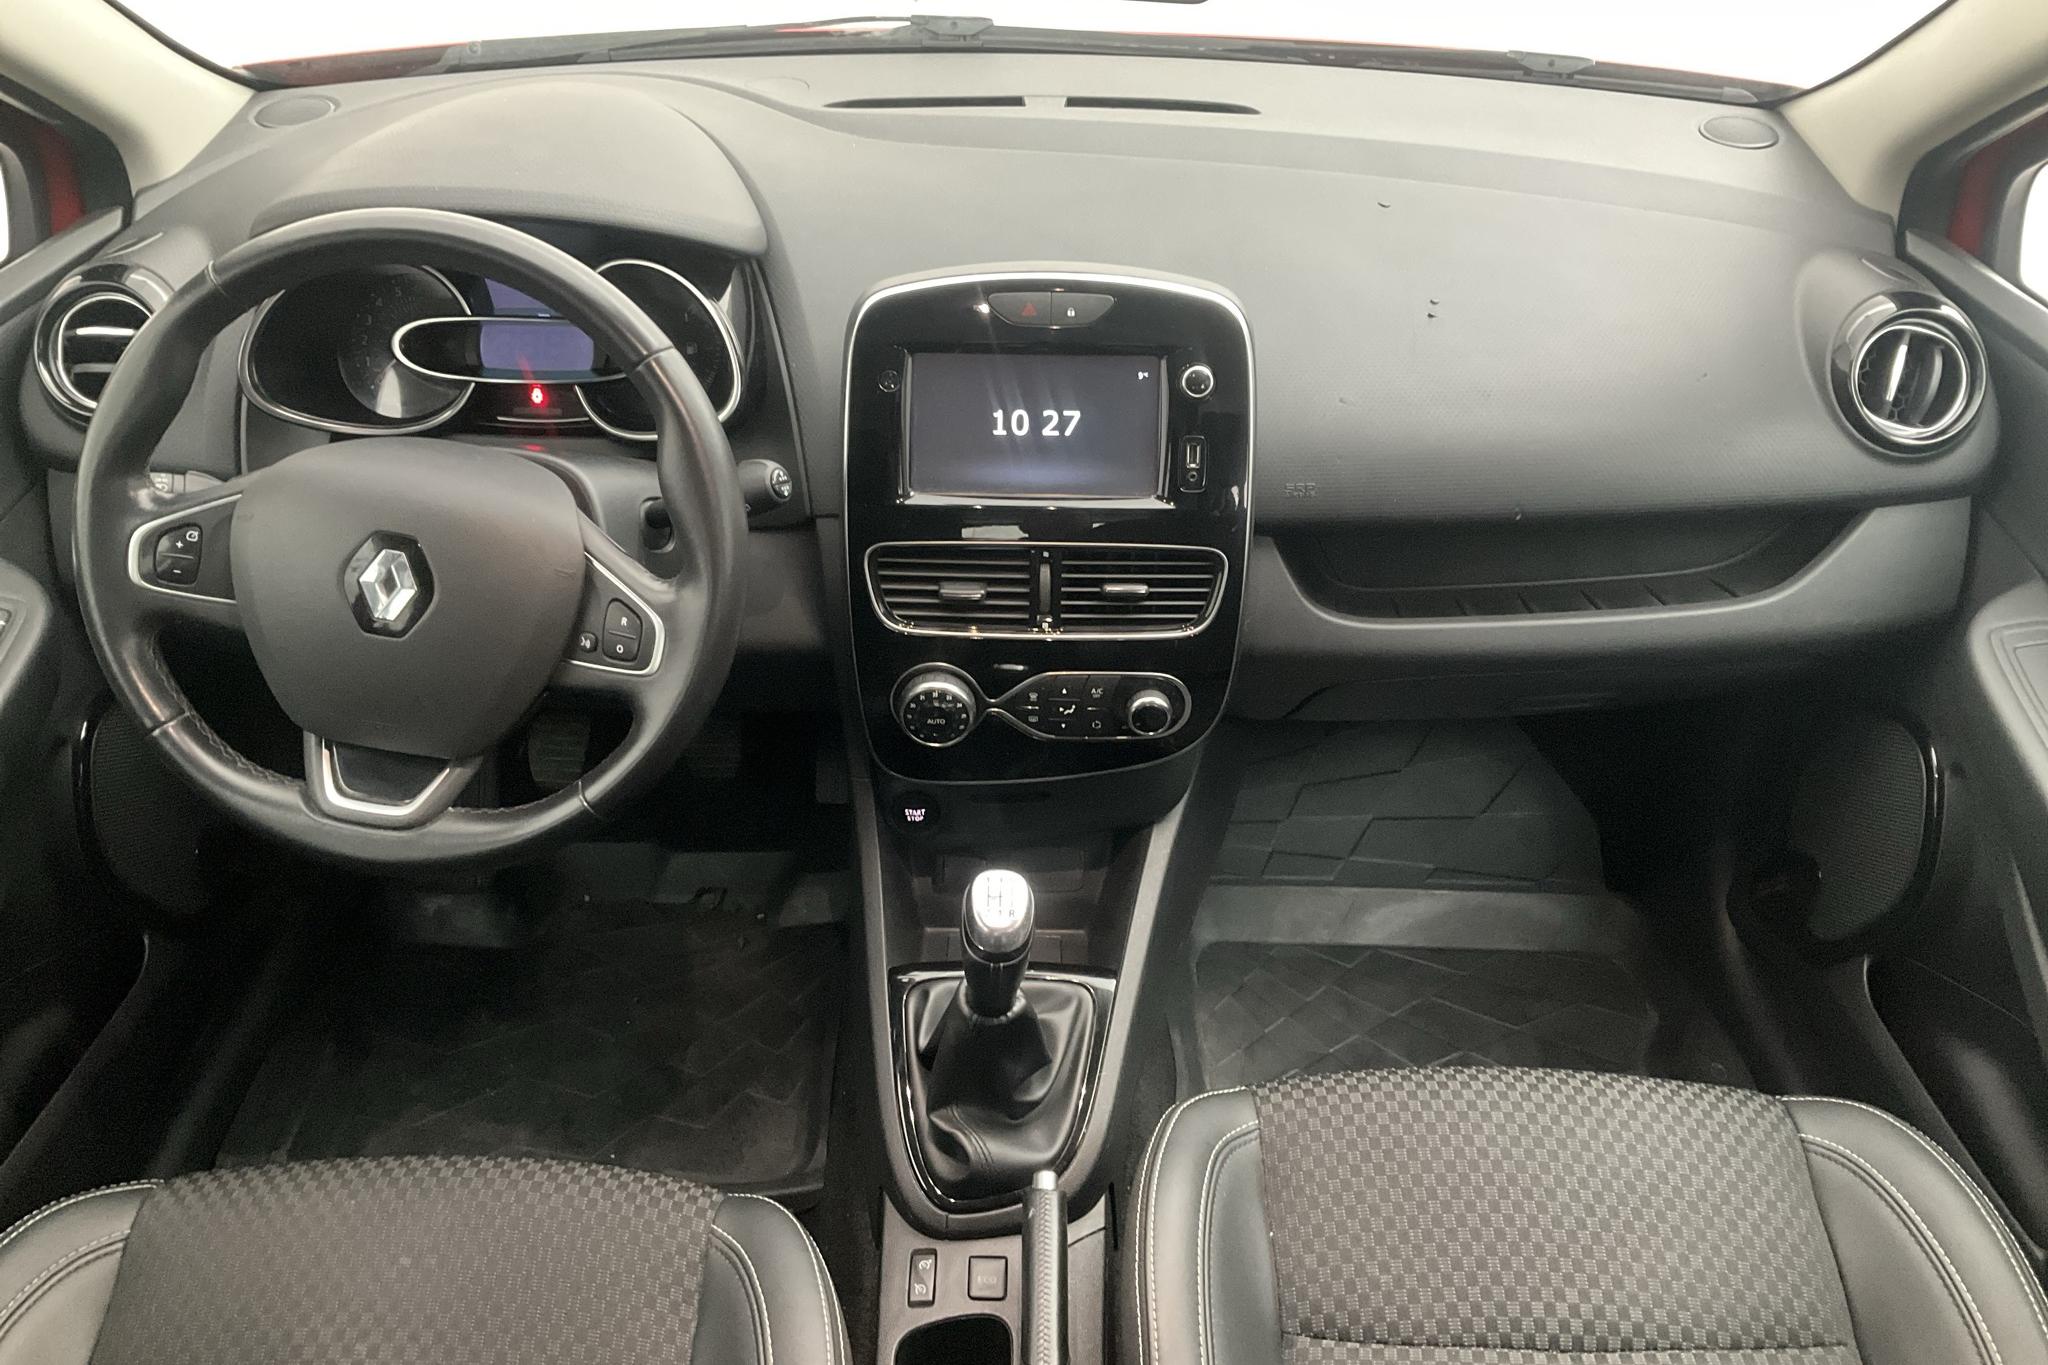 Renault Clio IV 0.9 TCe 90 5dr (90hk) - 68 750 km - Manual - red - 2019